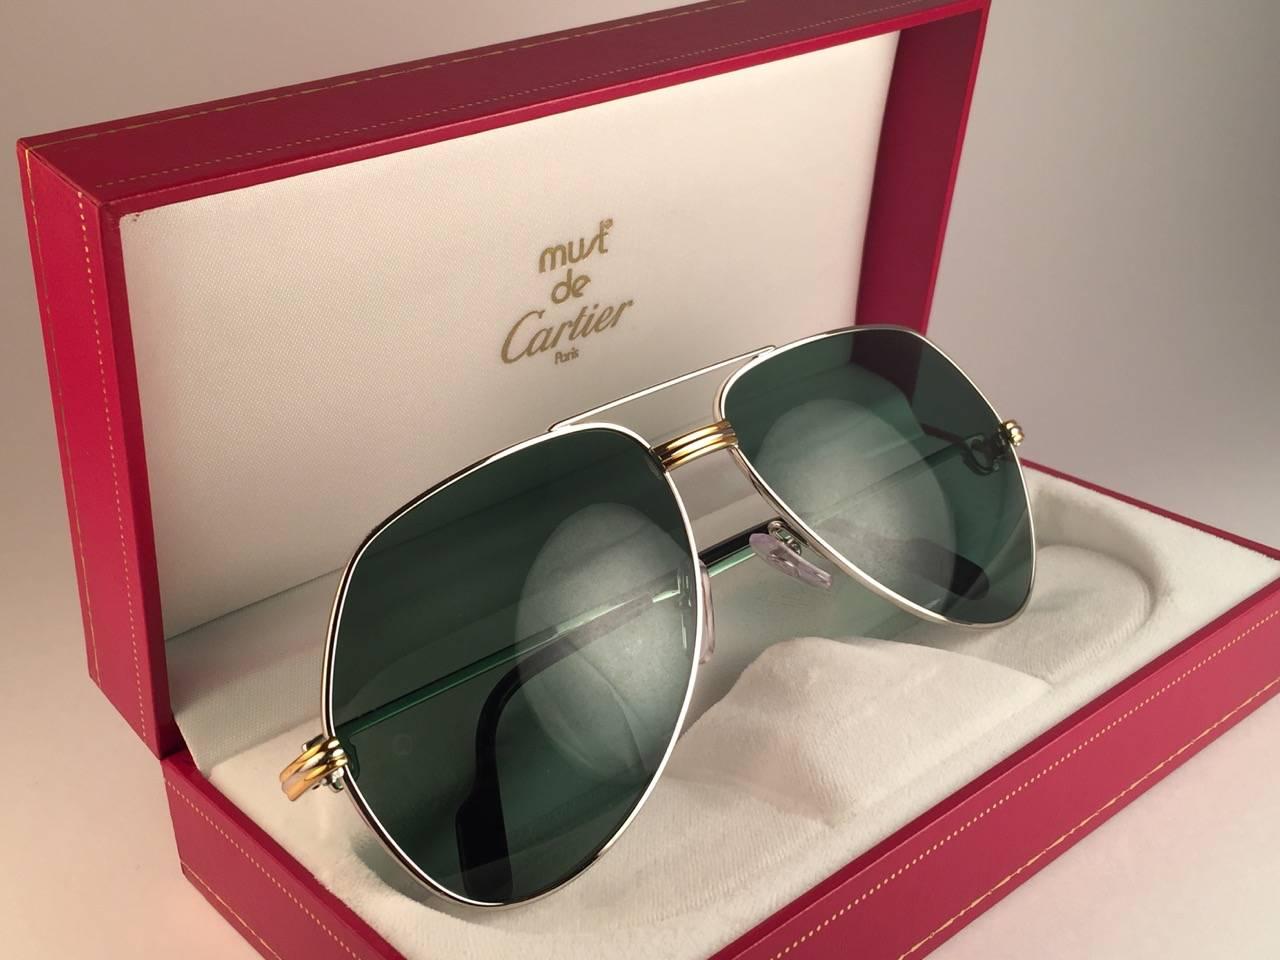 New 1983 Cartier Platinum Vendome sunglasses with original Cartier grey lenses (uv protection) 
The frame is with the front and sides in platinum & yellow gold.
All hallmarks. Black enamel with Cartier silver signs on the earpaddles. 
Both arms